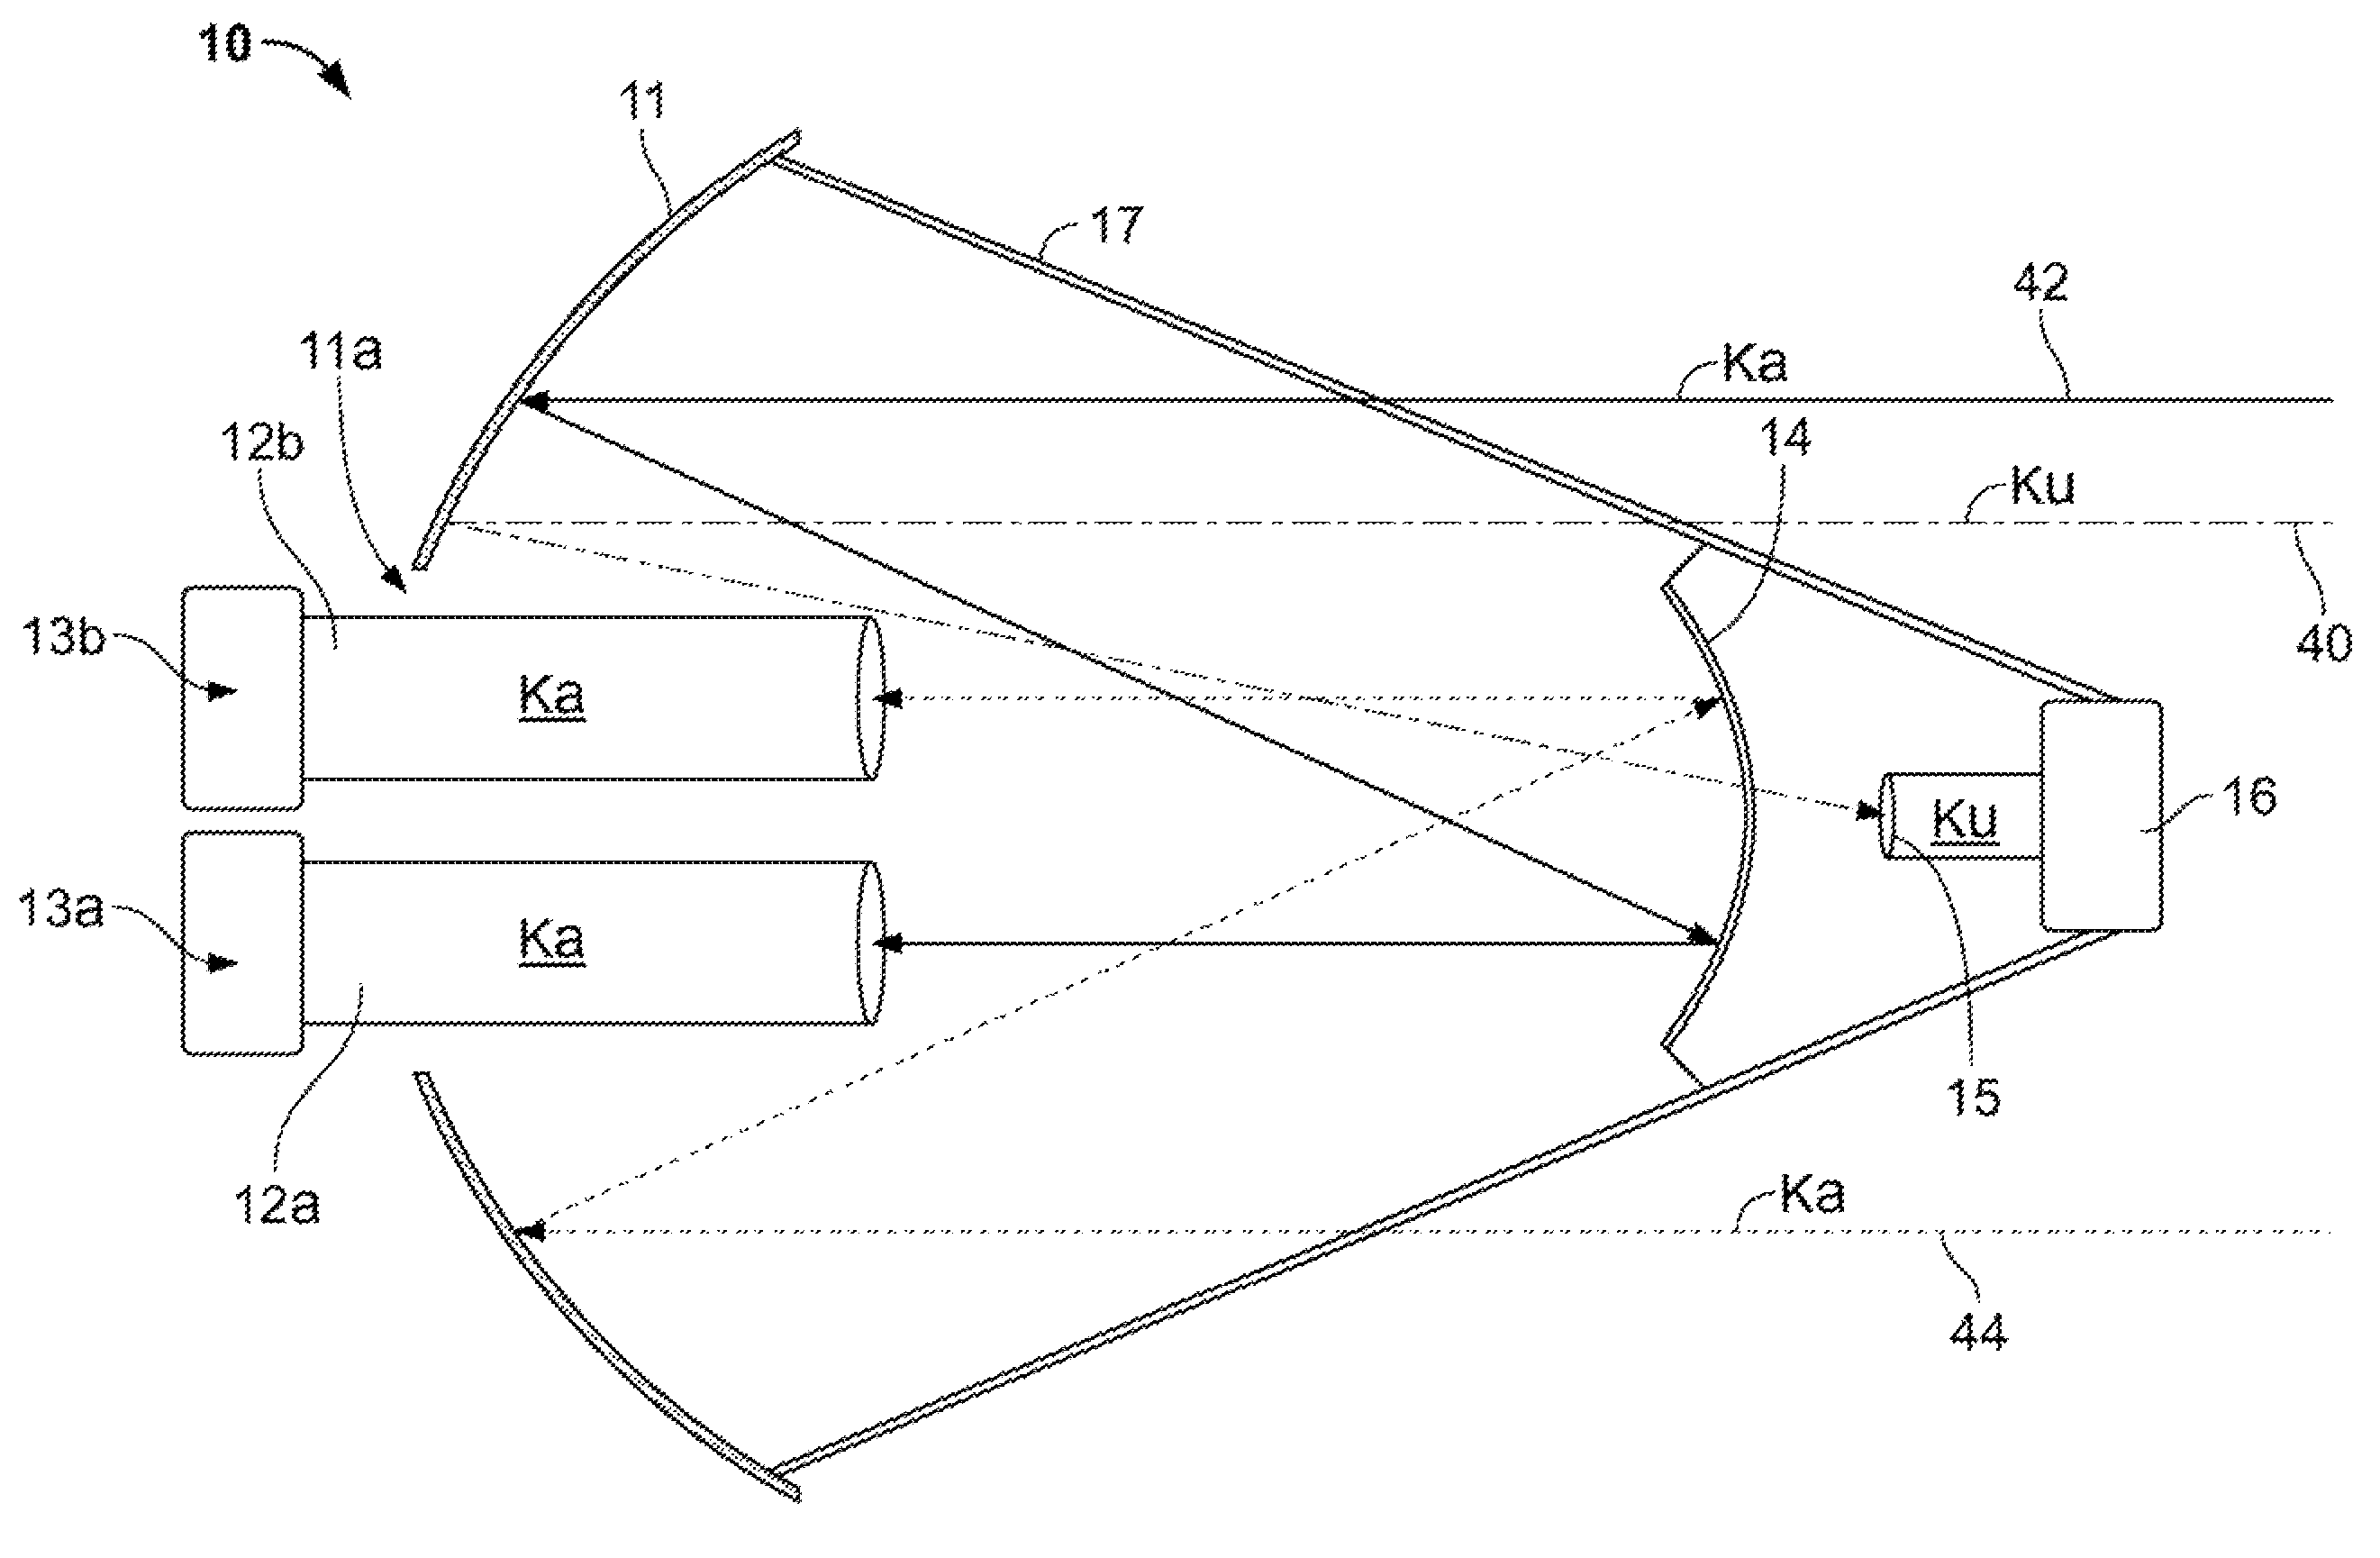 Multi-band antenna system for satellite communications